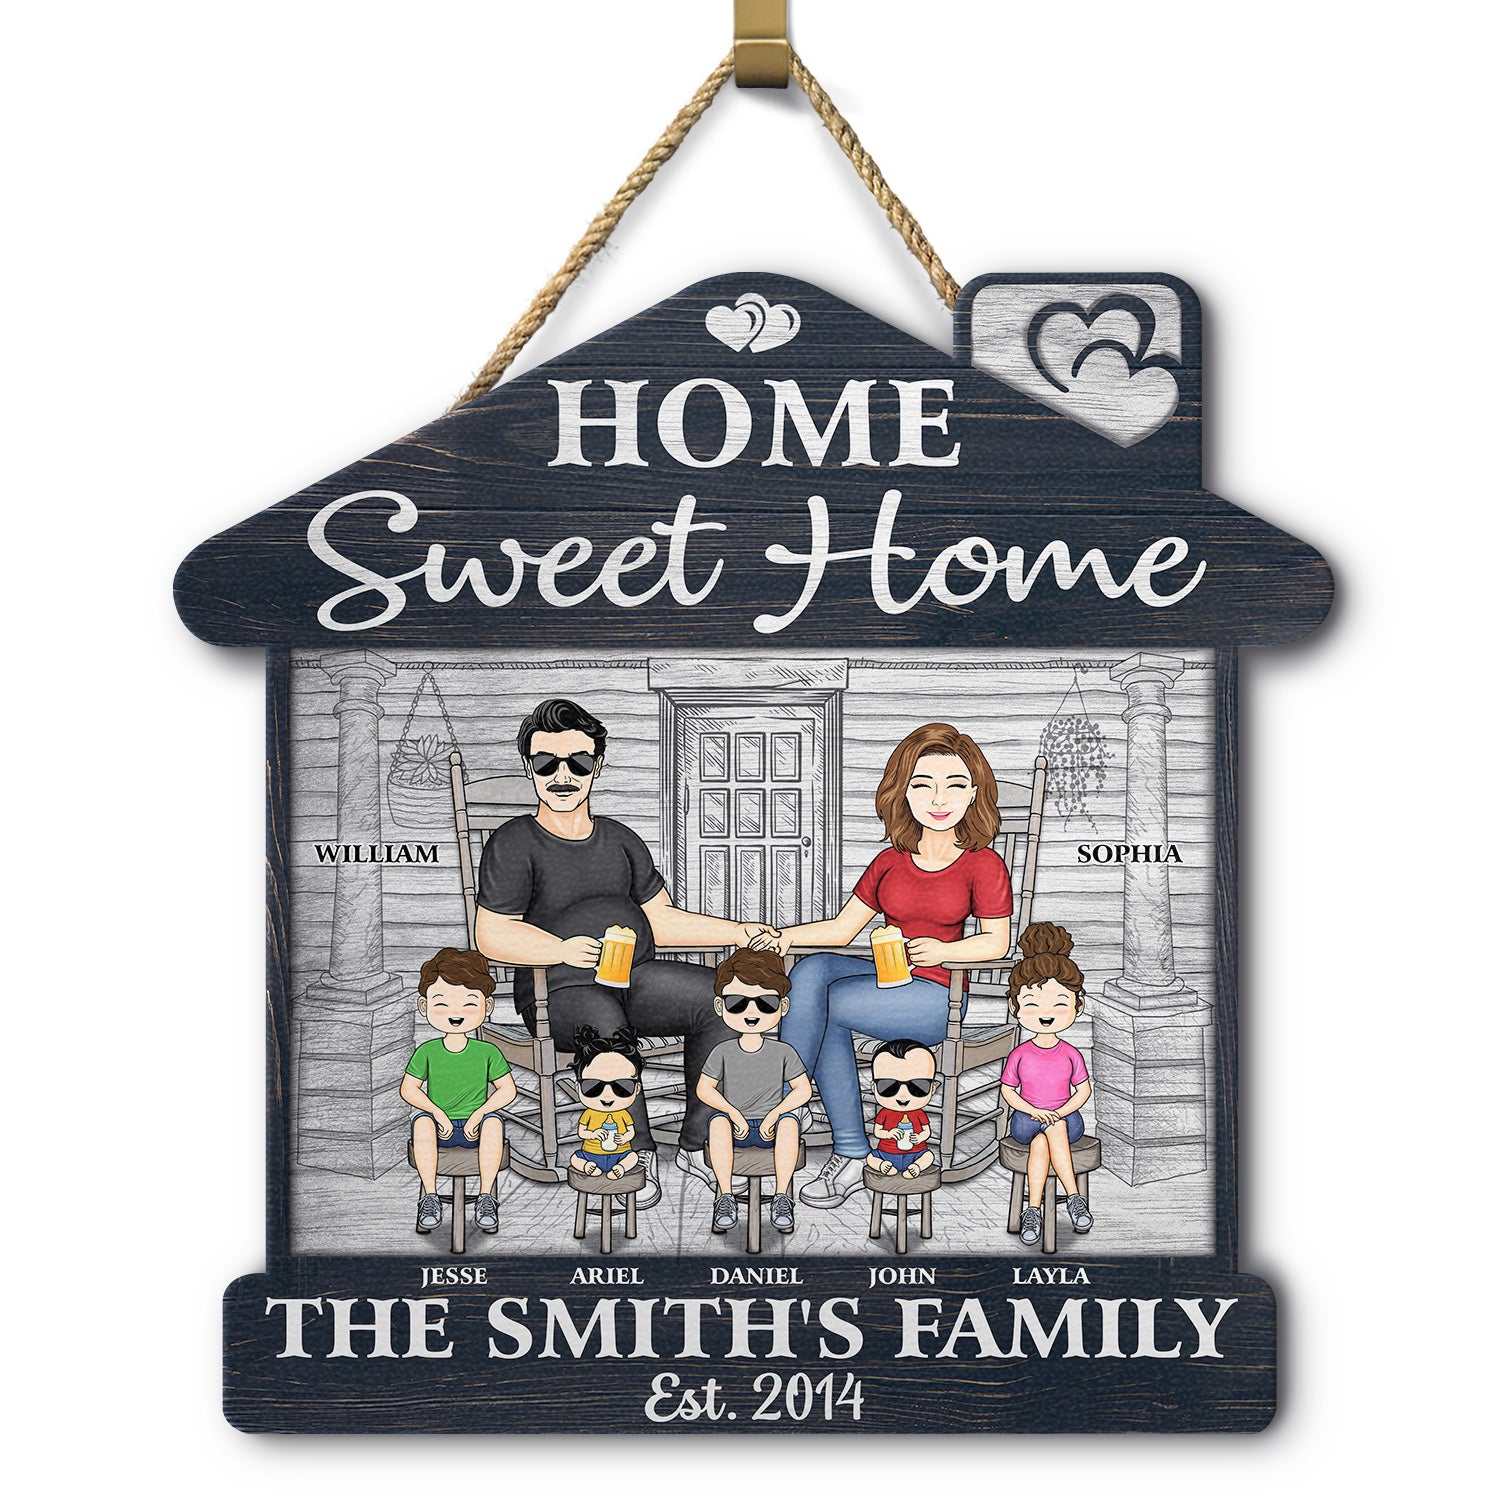 Home Sweet Home - Outdoor, Home Decor Gift For Family, Husband, Wife, Couple - Personalized Custom Shaped Wood Sign